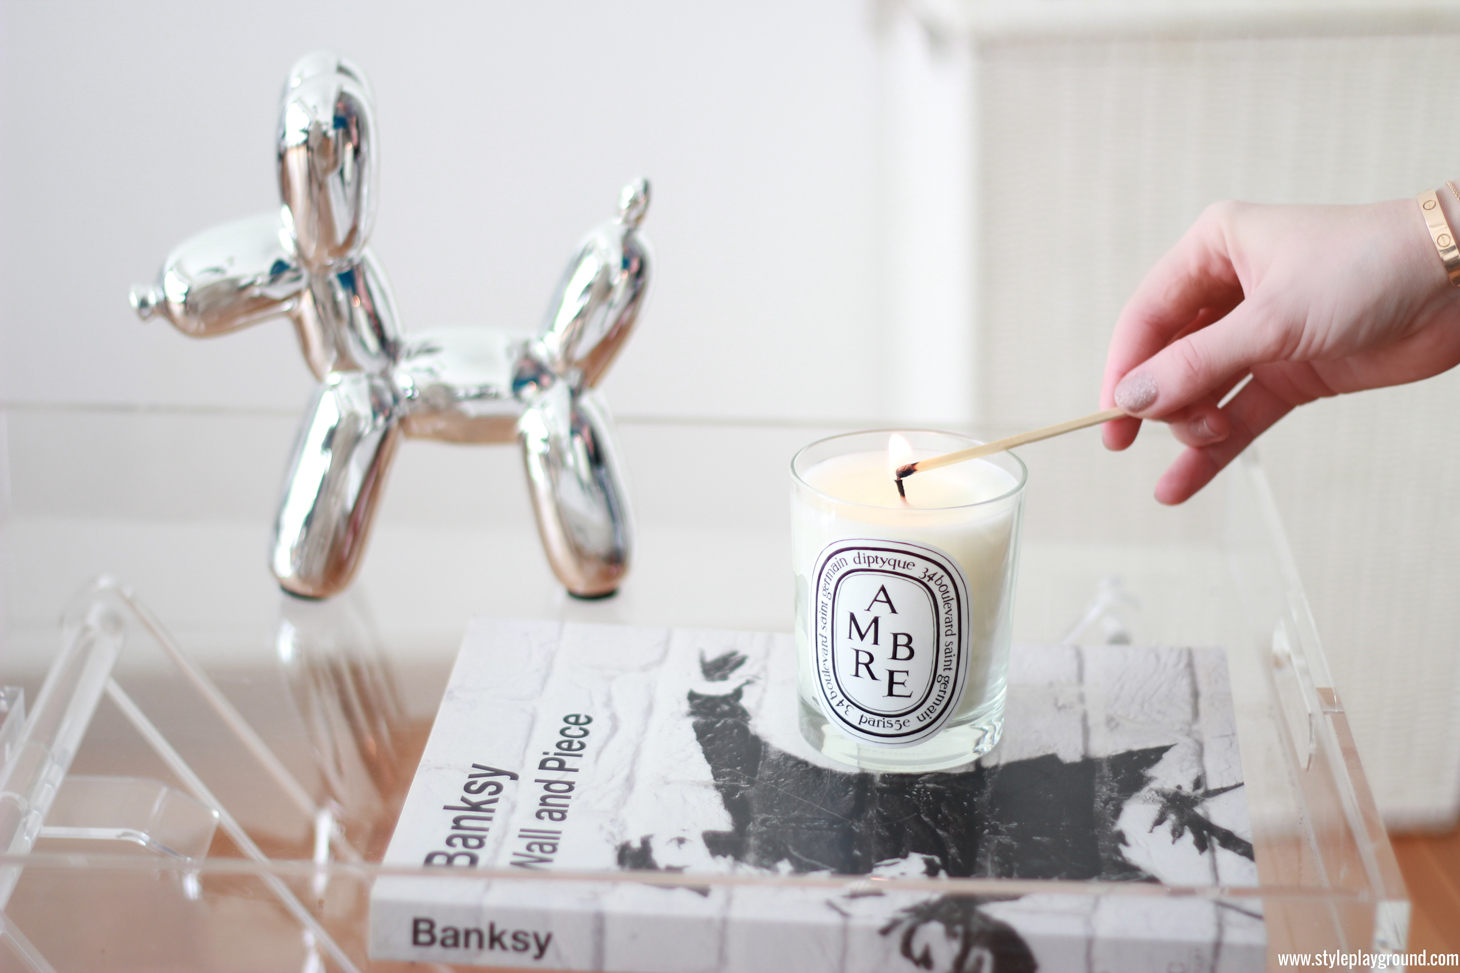 Candles basics  /// Tips & trick to choose the right candle and make the most of it! 